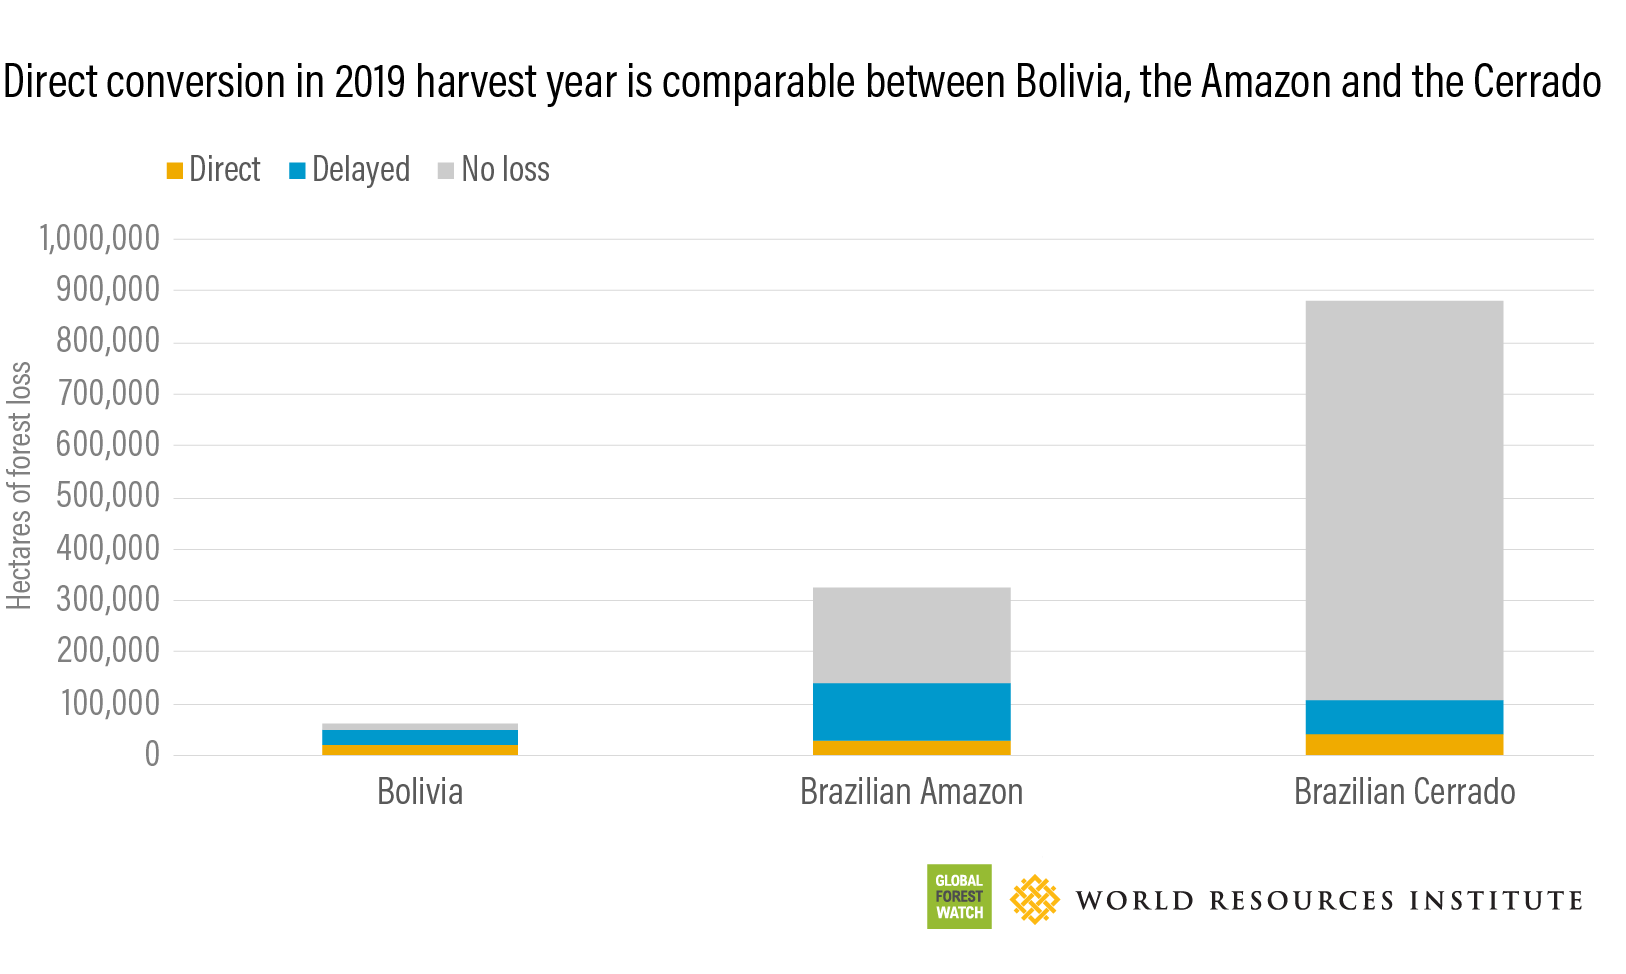 Direct conversion in 2019 harvest year is comparable between Bolivia, the Amazon and the Cerrado